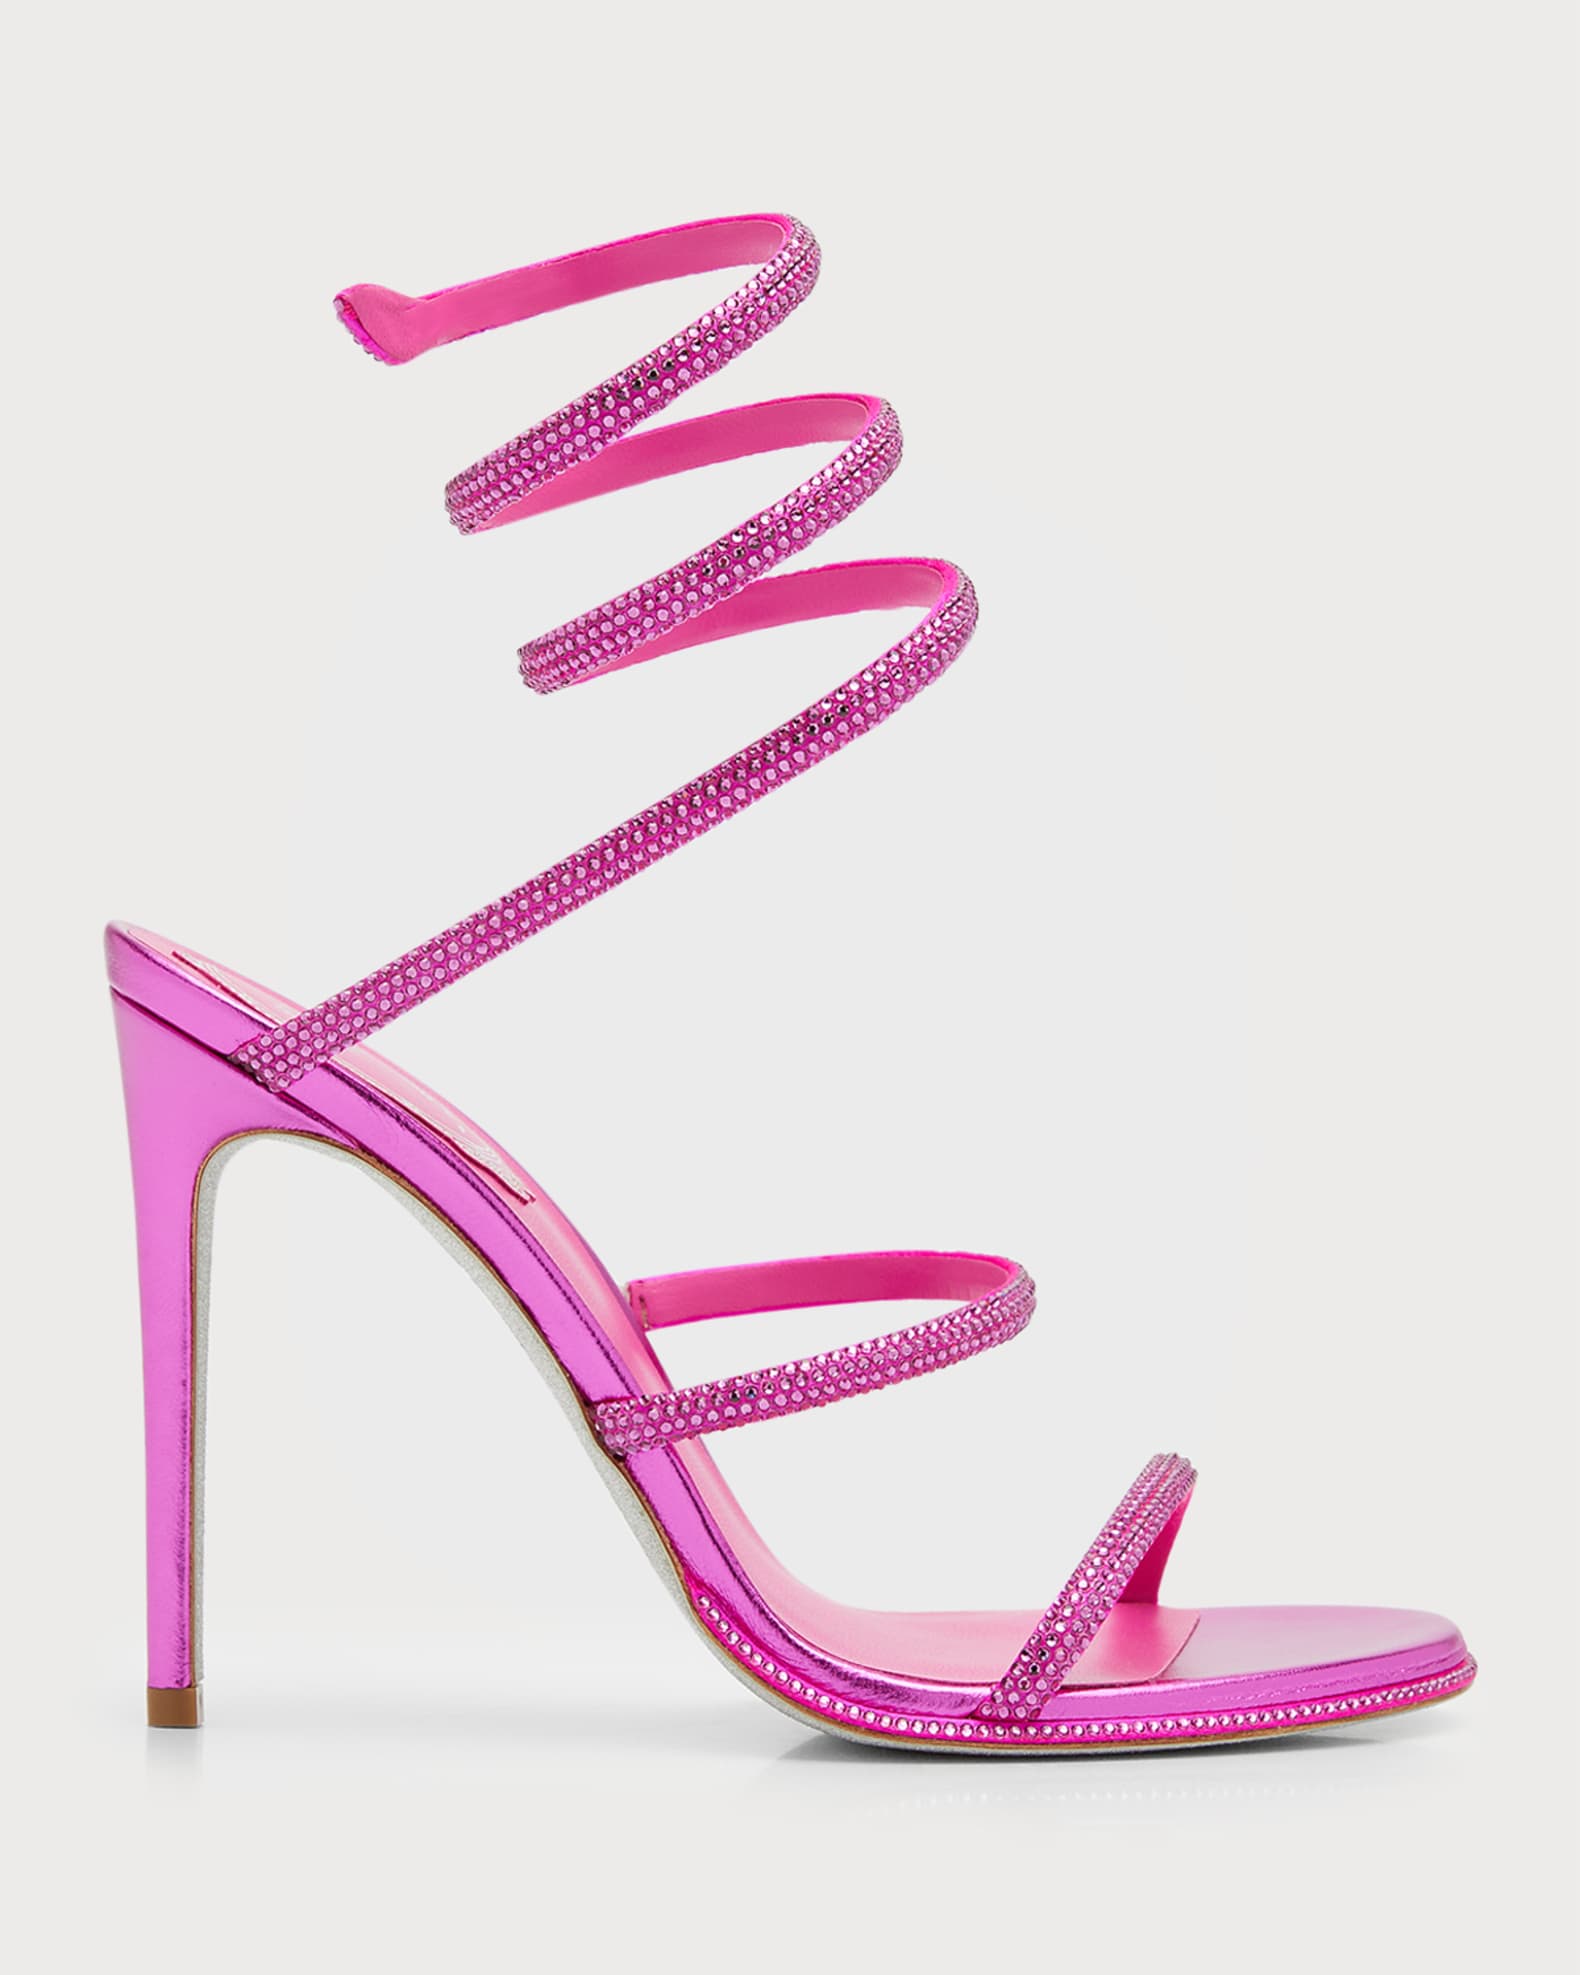 Hot pink strappy lace up heels from Rene Caovilla